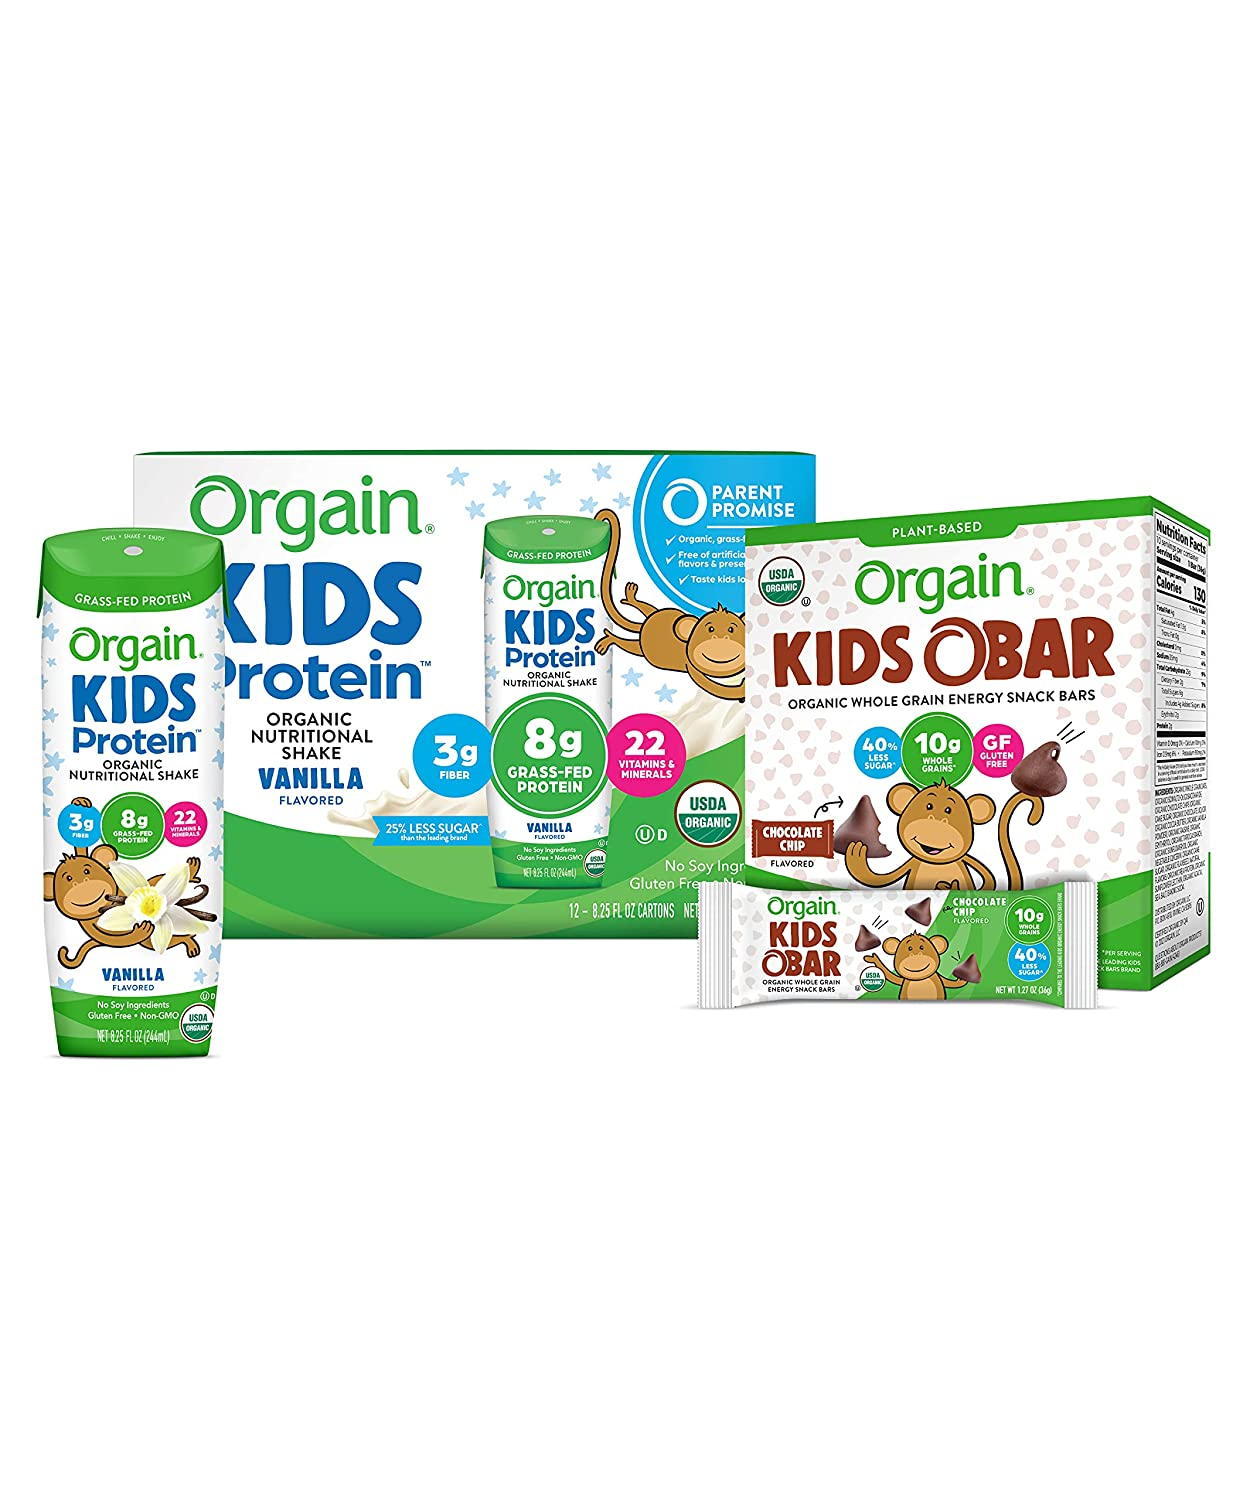 Orgain Organic Kids Protein Nutritional Shake, Strawberry - 8G of Protein, 22 Vitamins & Minerals, Fruits & Vegetables, Gluten Free, Soy Free, Kosher, Non-Gmo, 8.25 Oz, 12 Ct (Packaging May Vary)